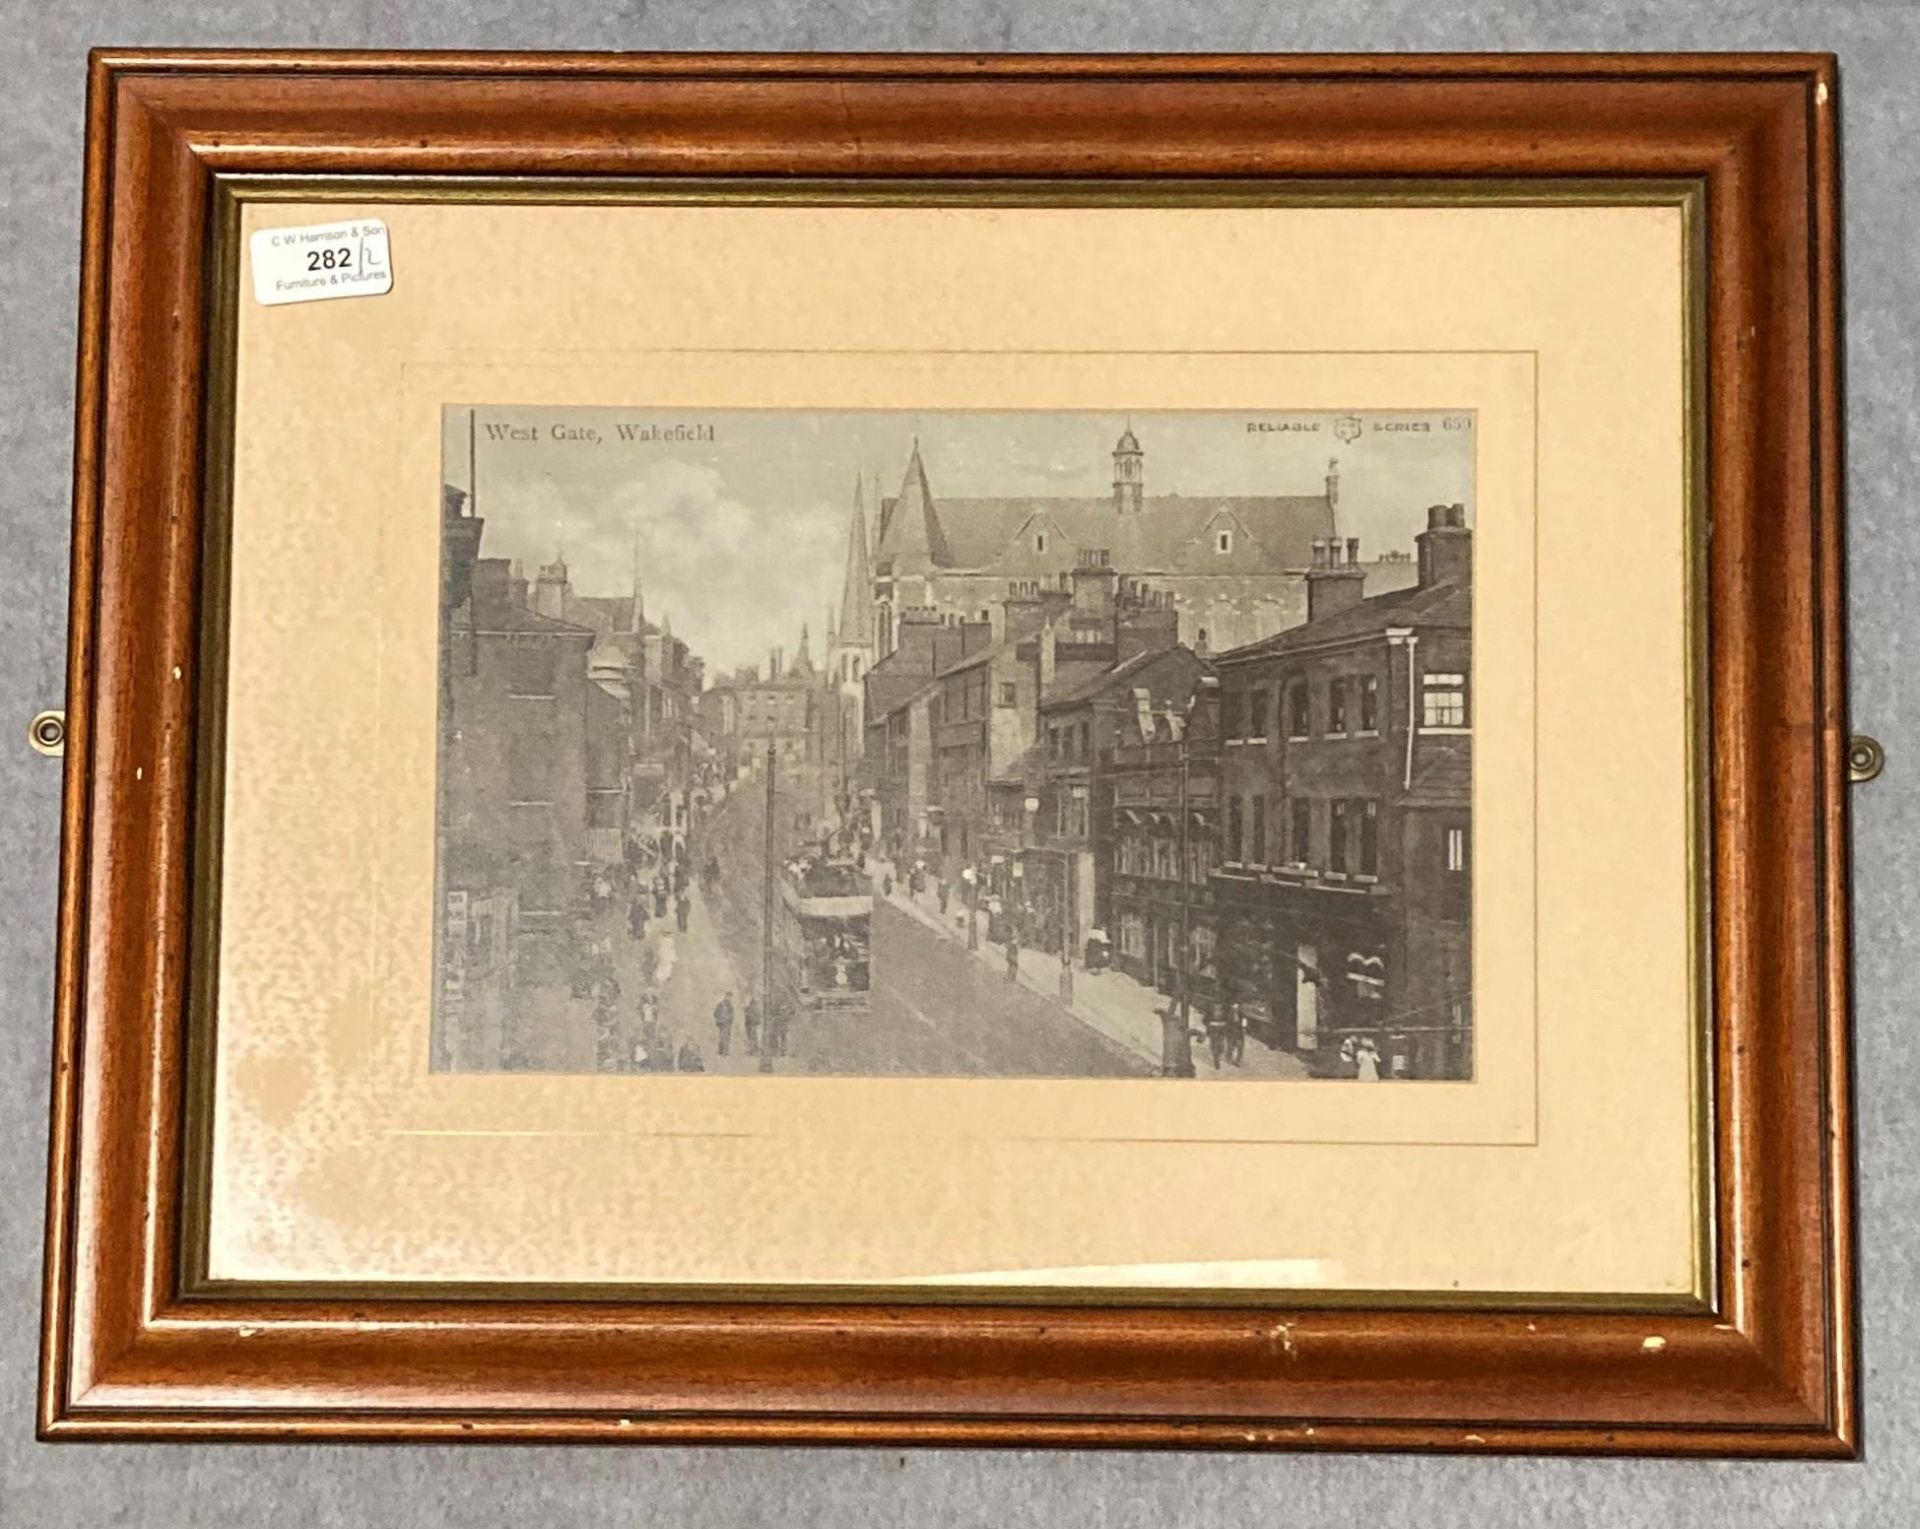 Framed coloured print of 'The Springs, Wakefield', - Image 3 of 3